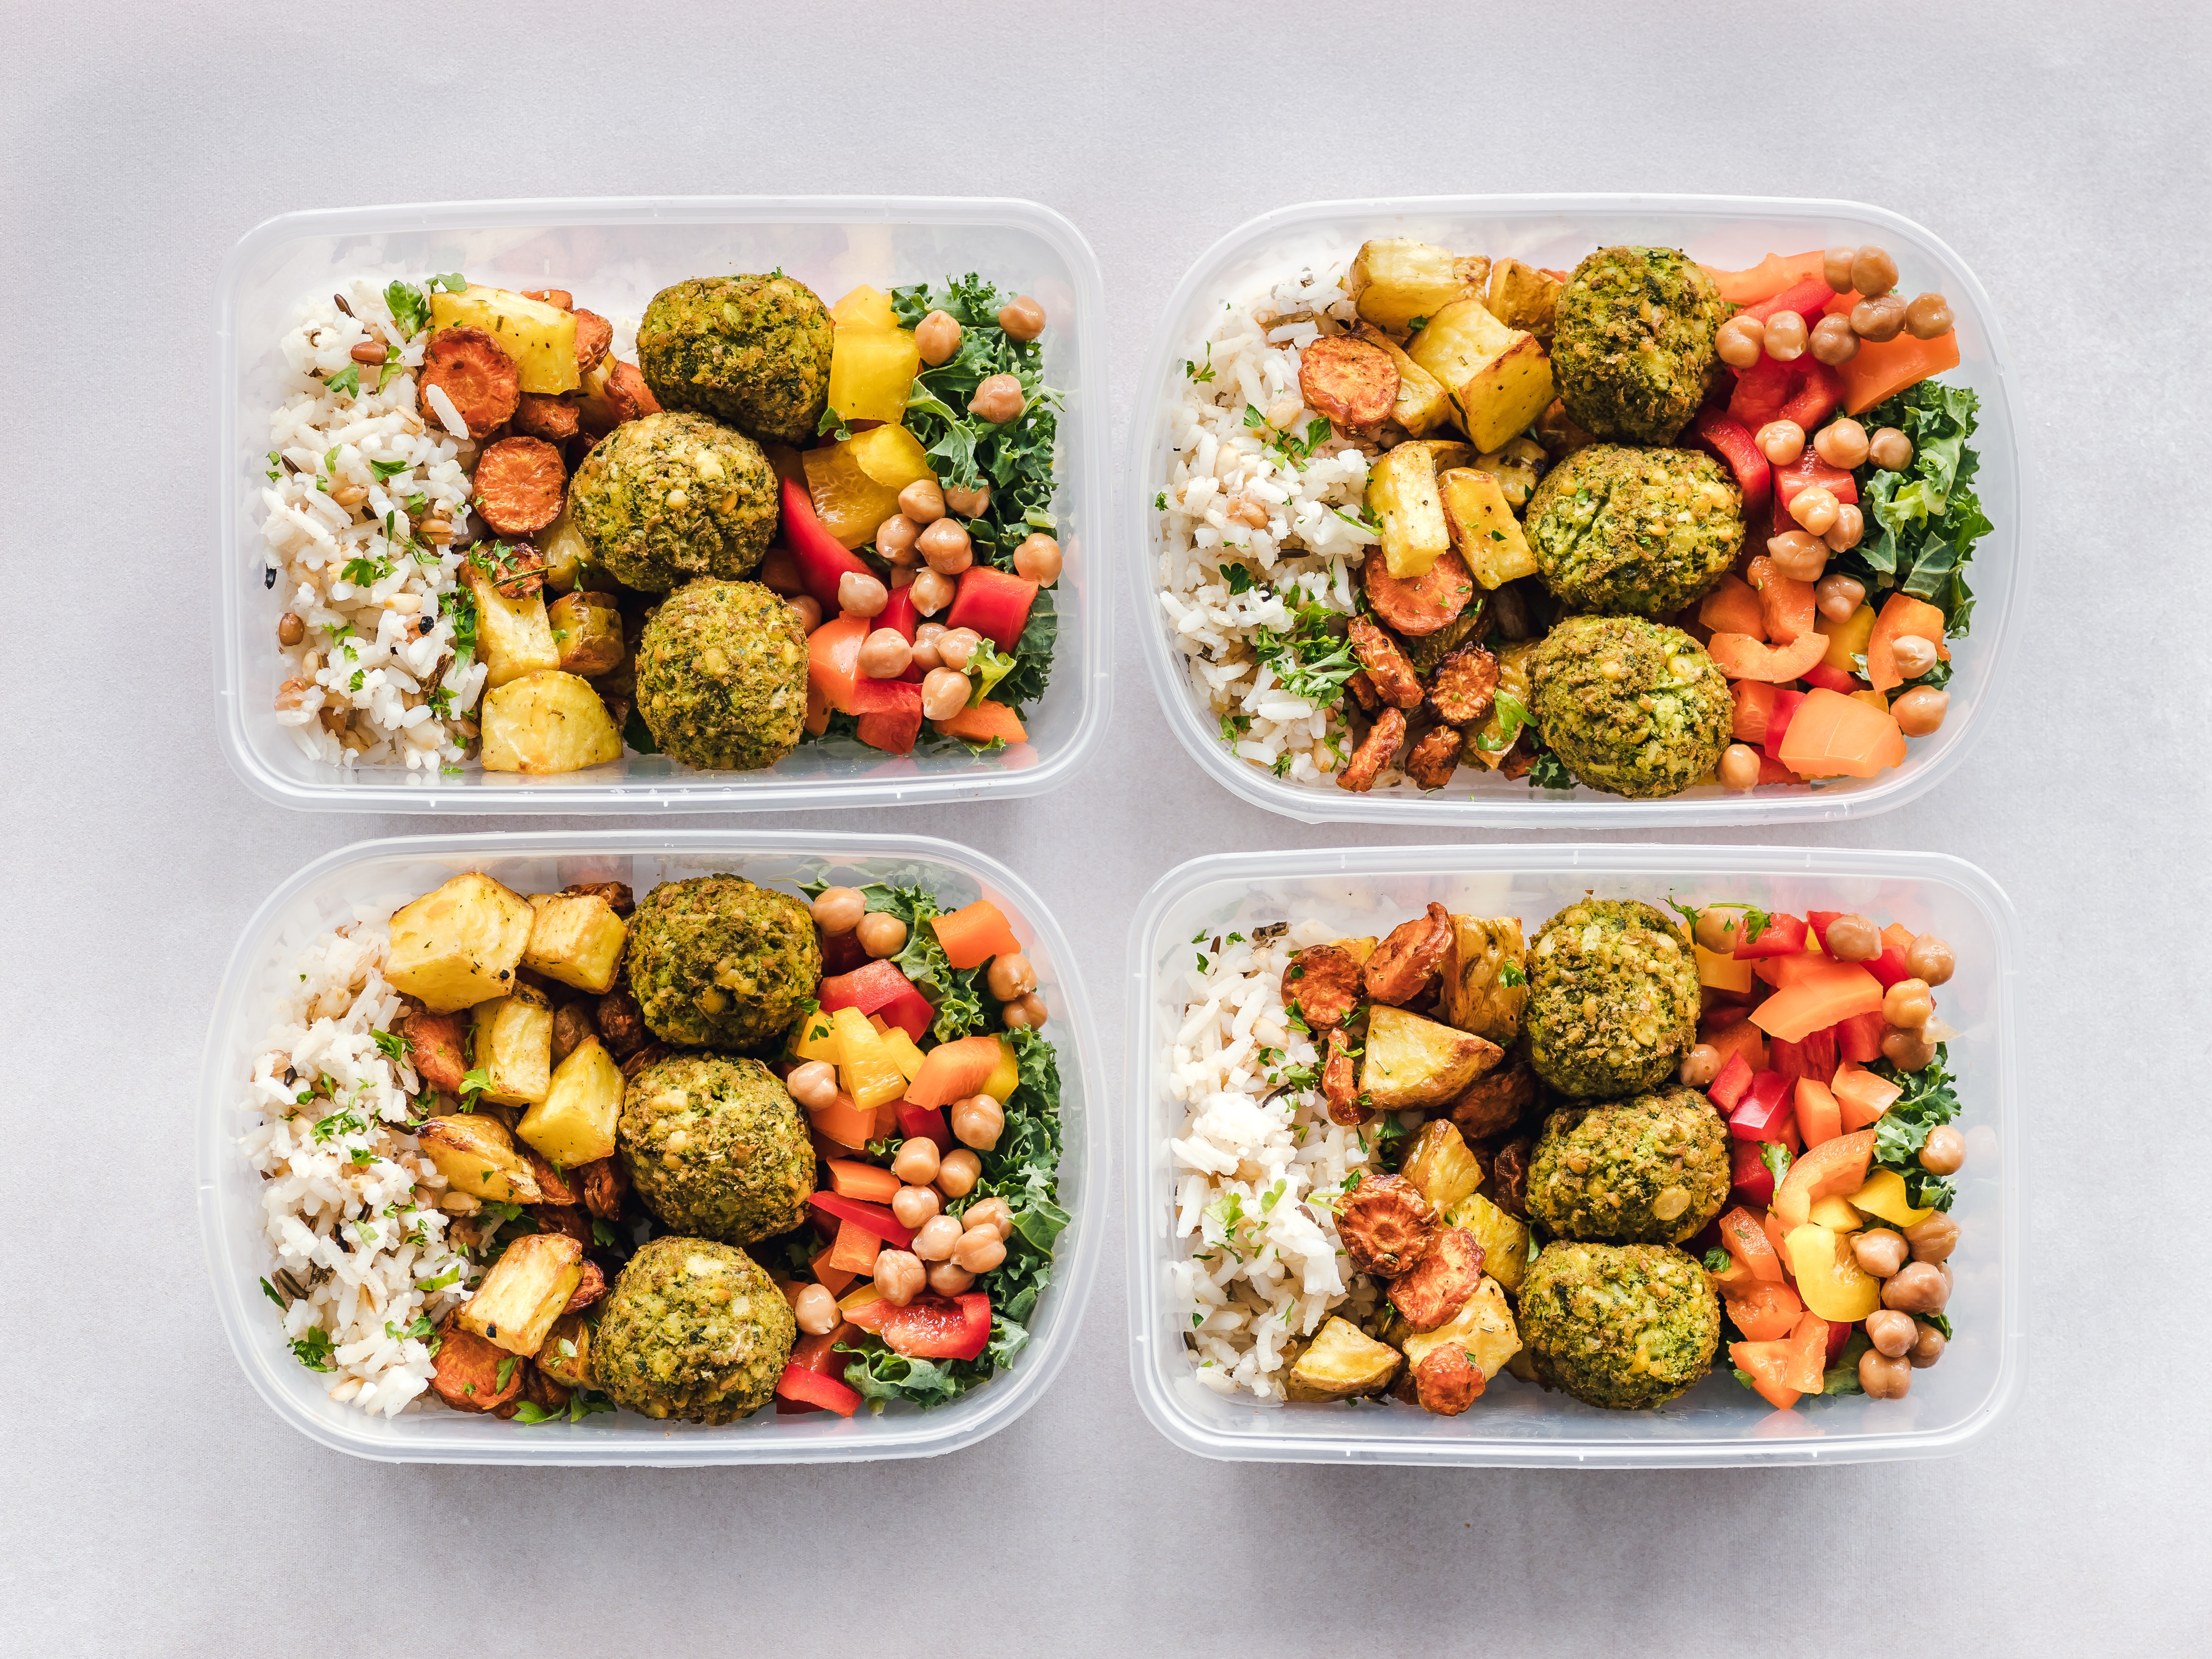 8 Healthy On-the-Go Meal Options for Busy People